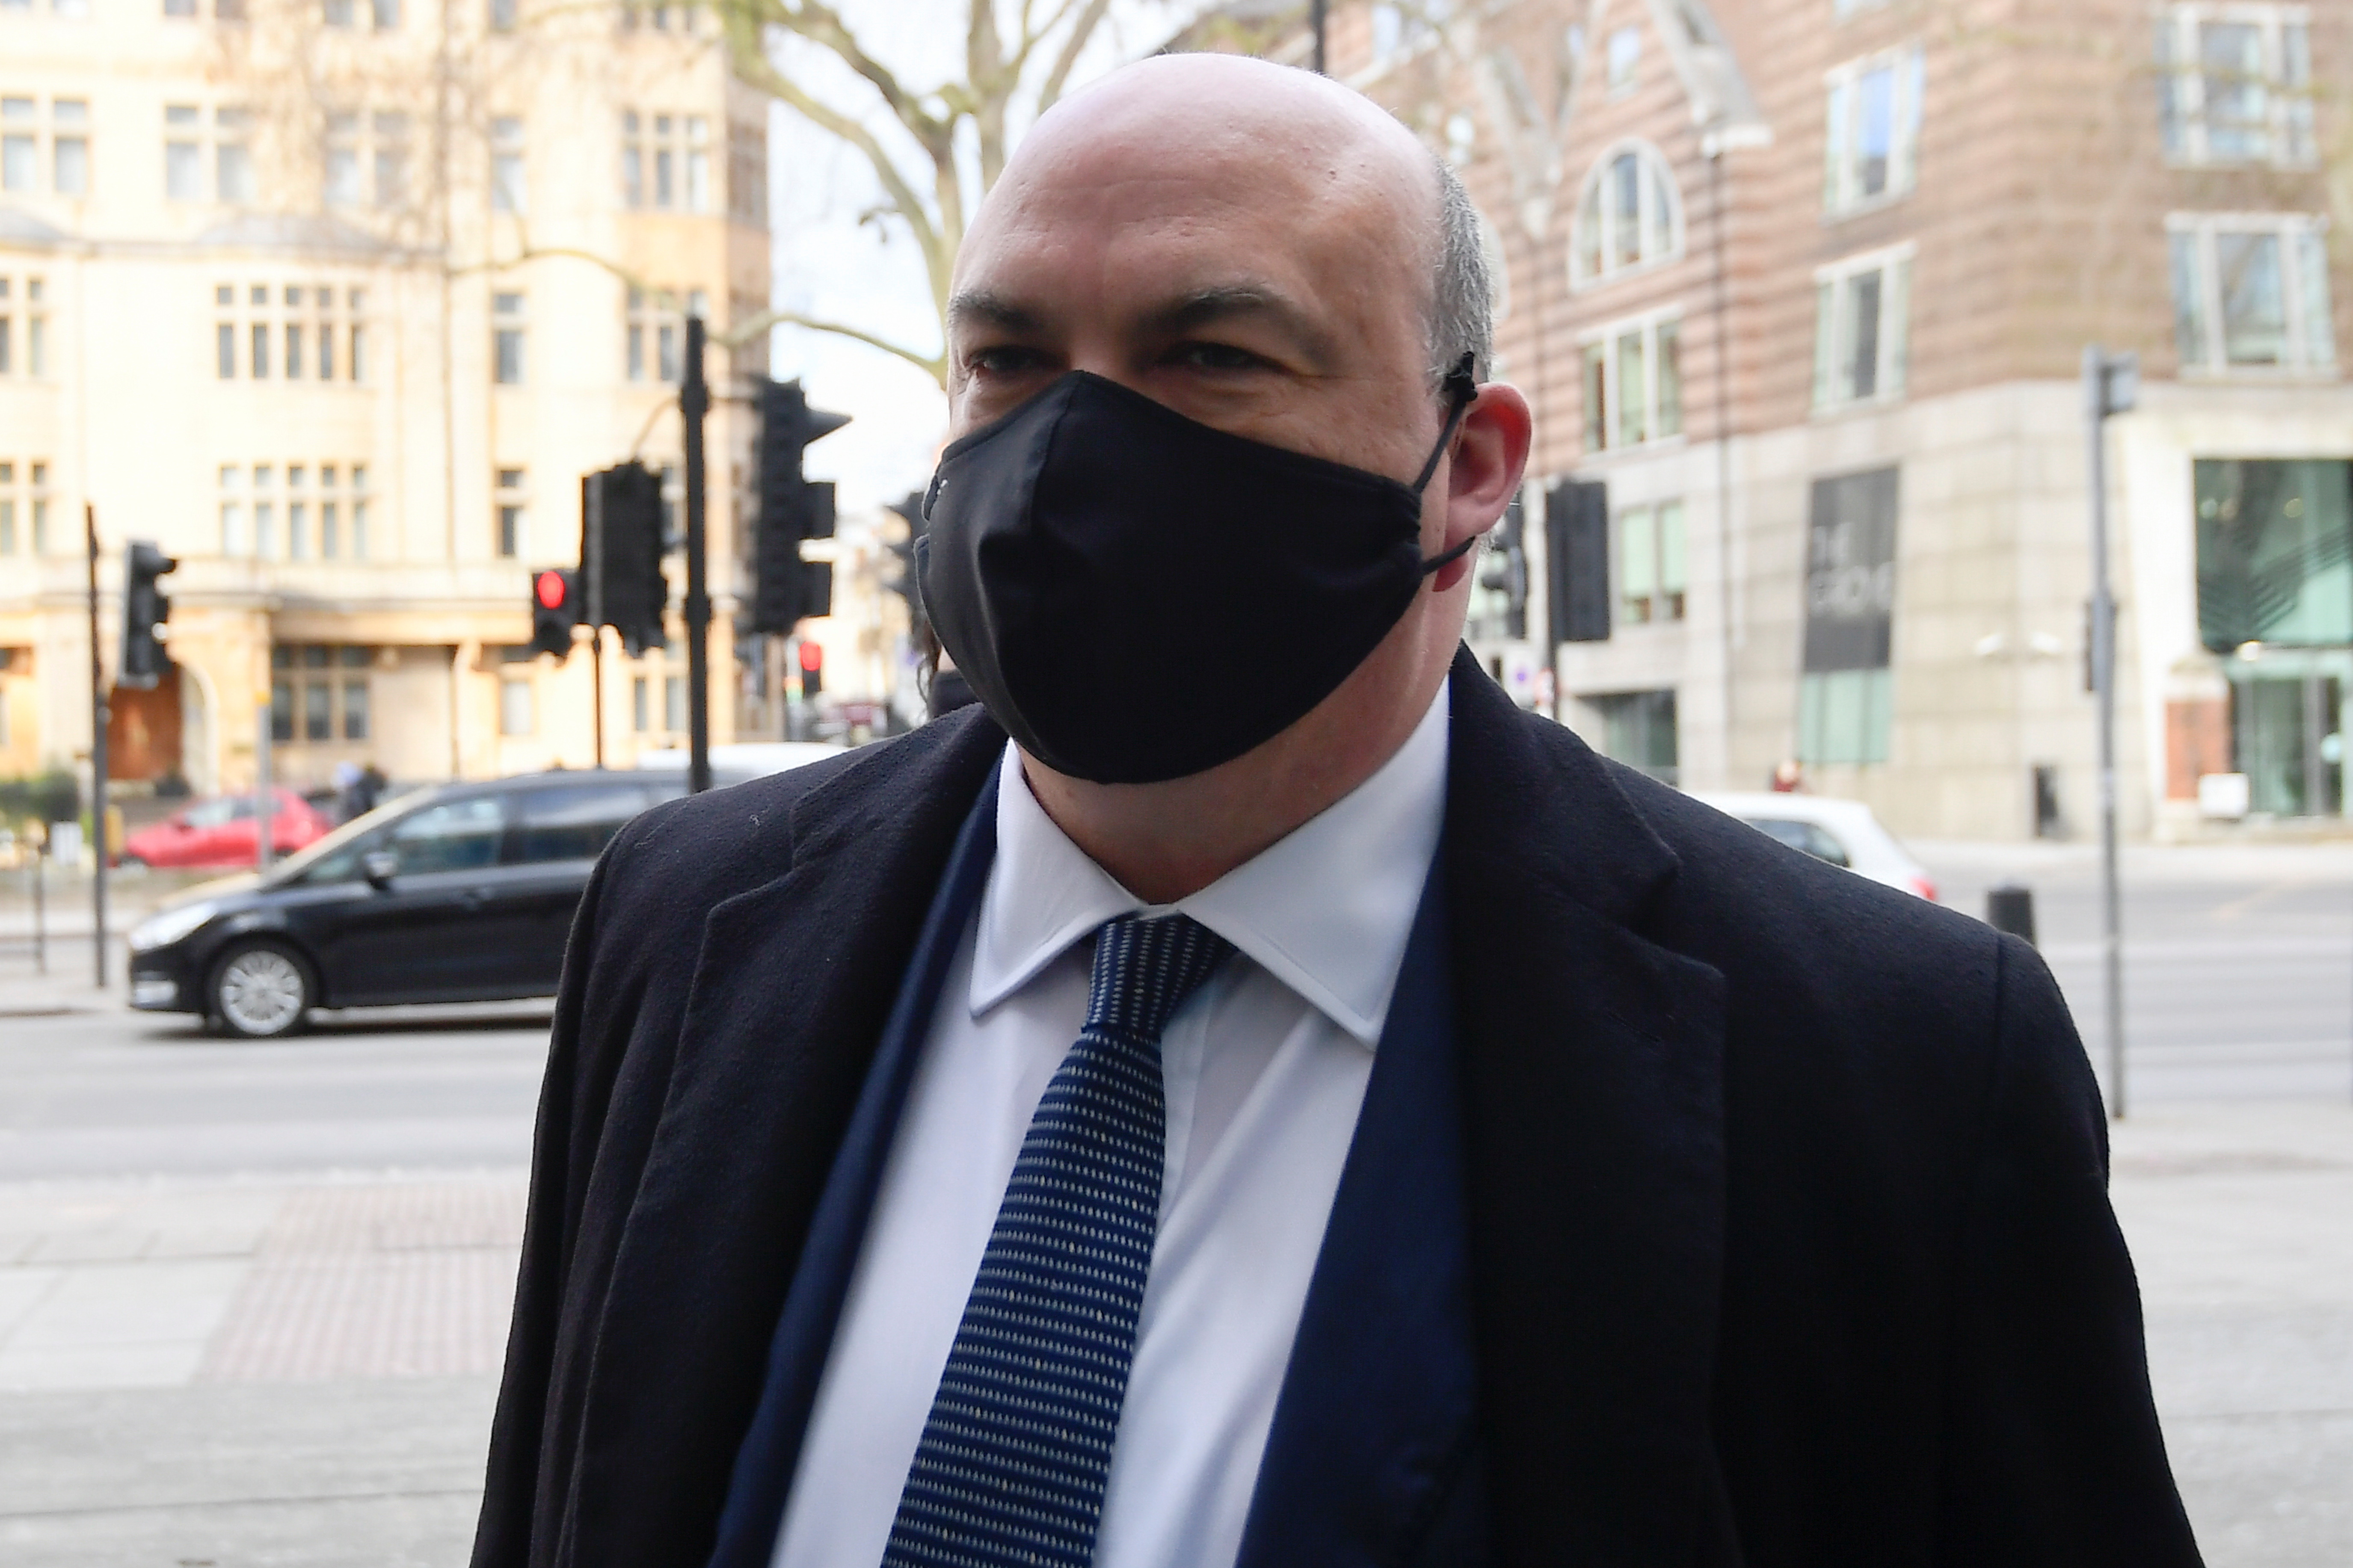 British entrepreneur Mike Lynch arrives at Westminster Magistrates Court in London, Britain, February 12, 2021. REUTERS/Toby Melville